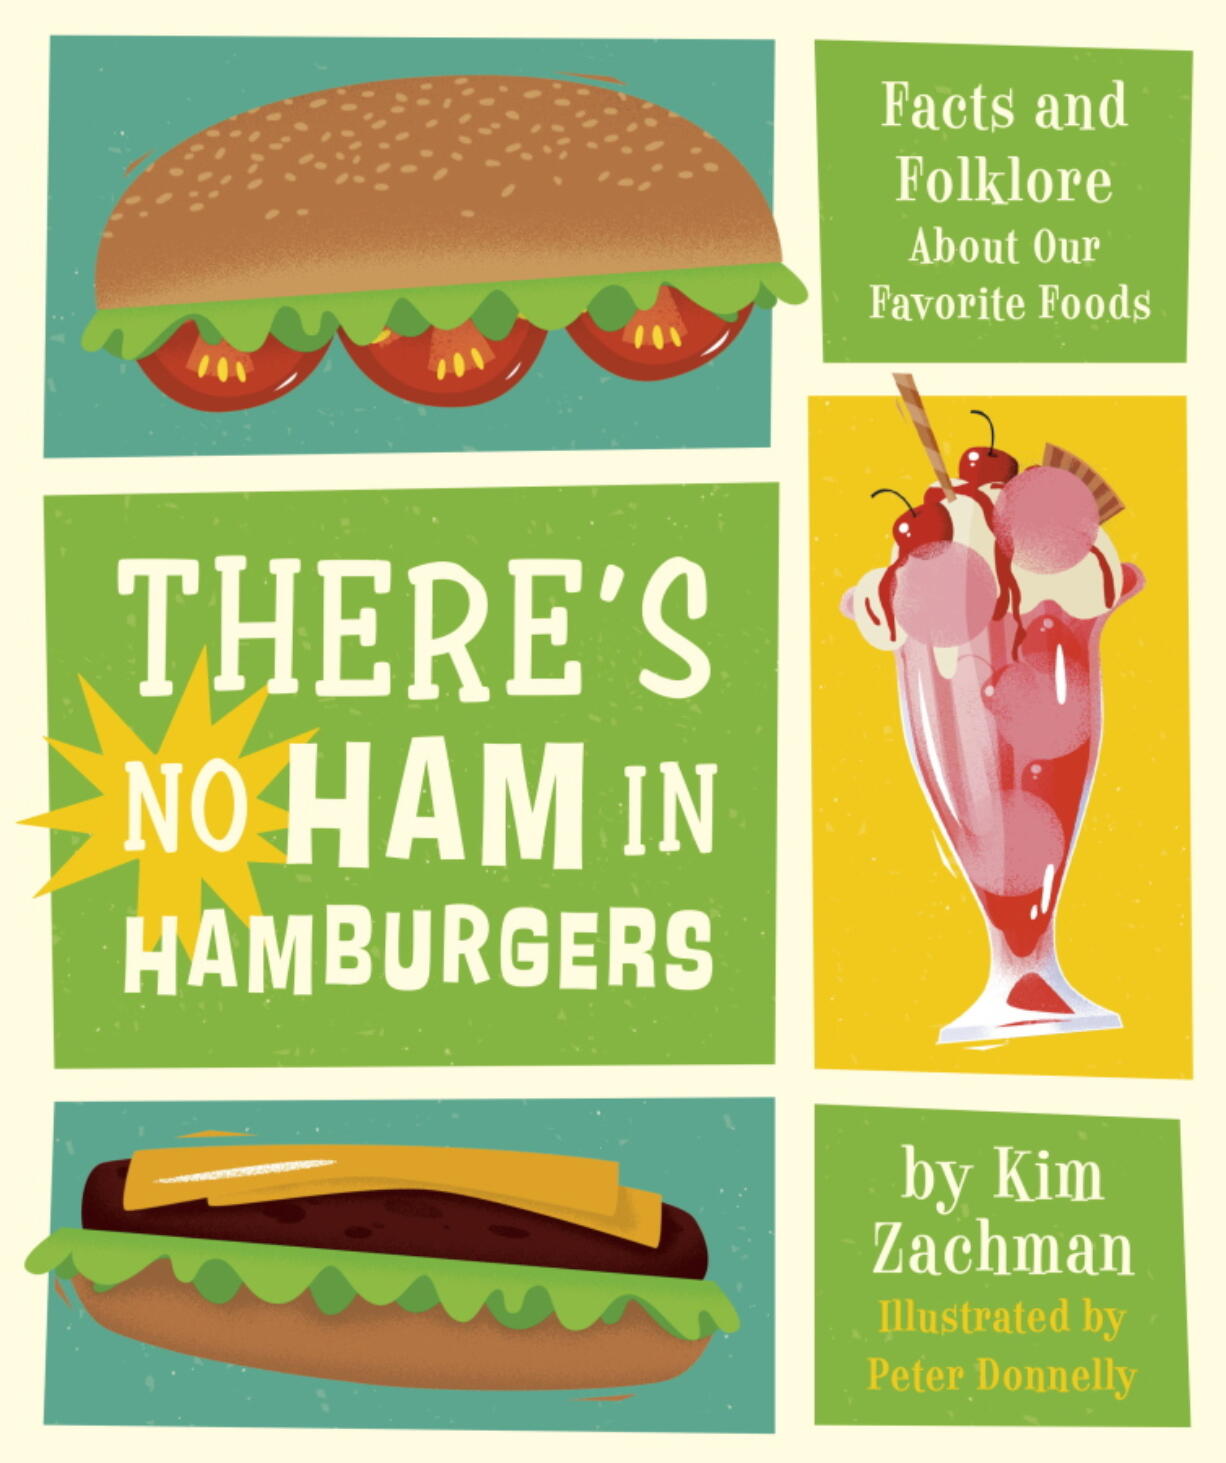 This photo shows the cover of "There's No Ham in Hamburger" by Kim Zachman and published by Running Press Kids. The book, out April 6, details the origins of peanut butter, chocolate, chicken nuggets and other popular kid fare with a nod to the science and folklore behind them.